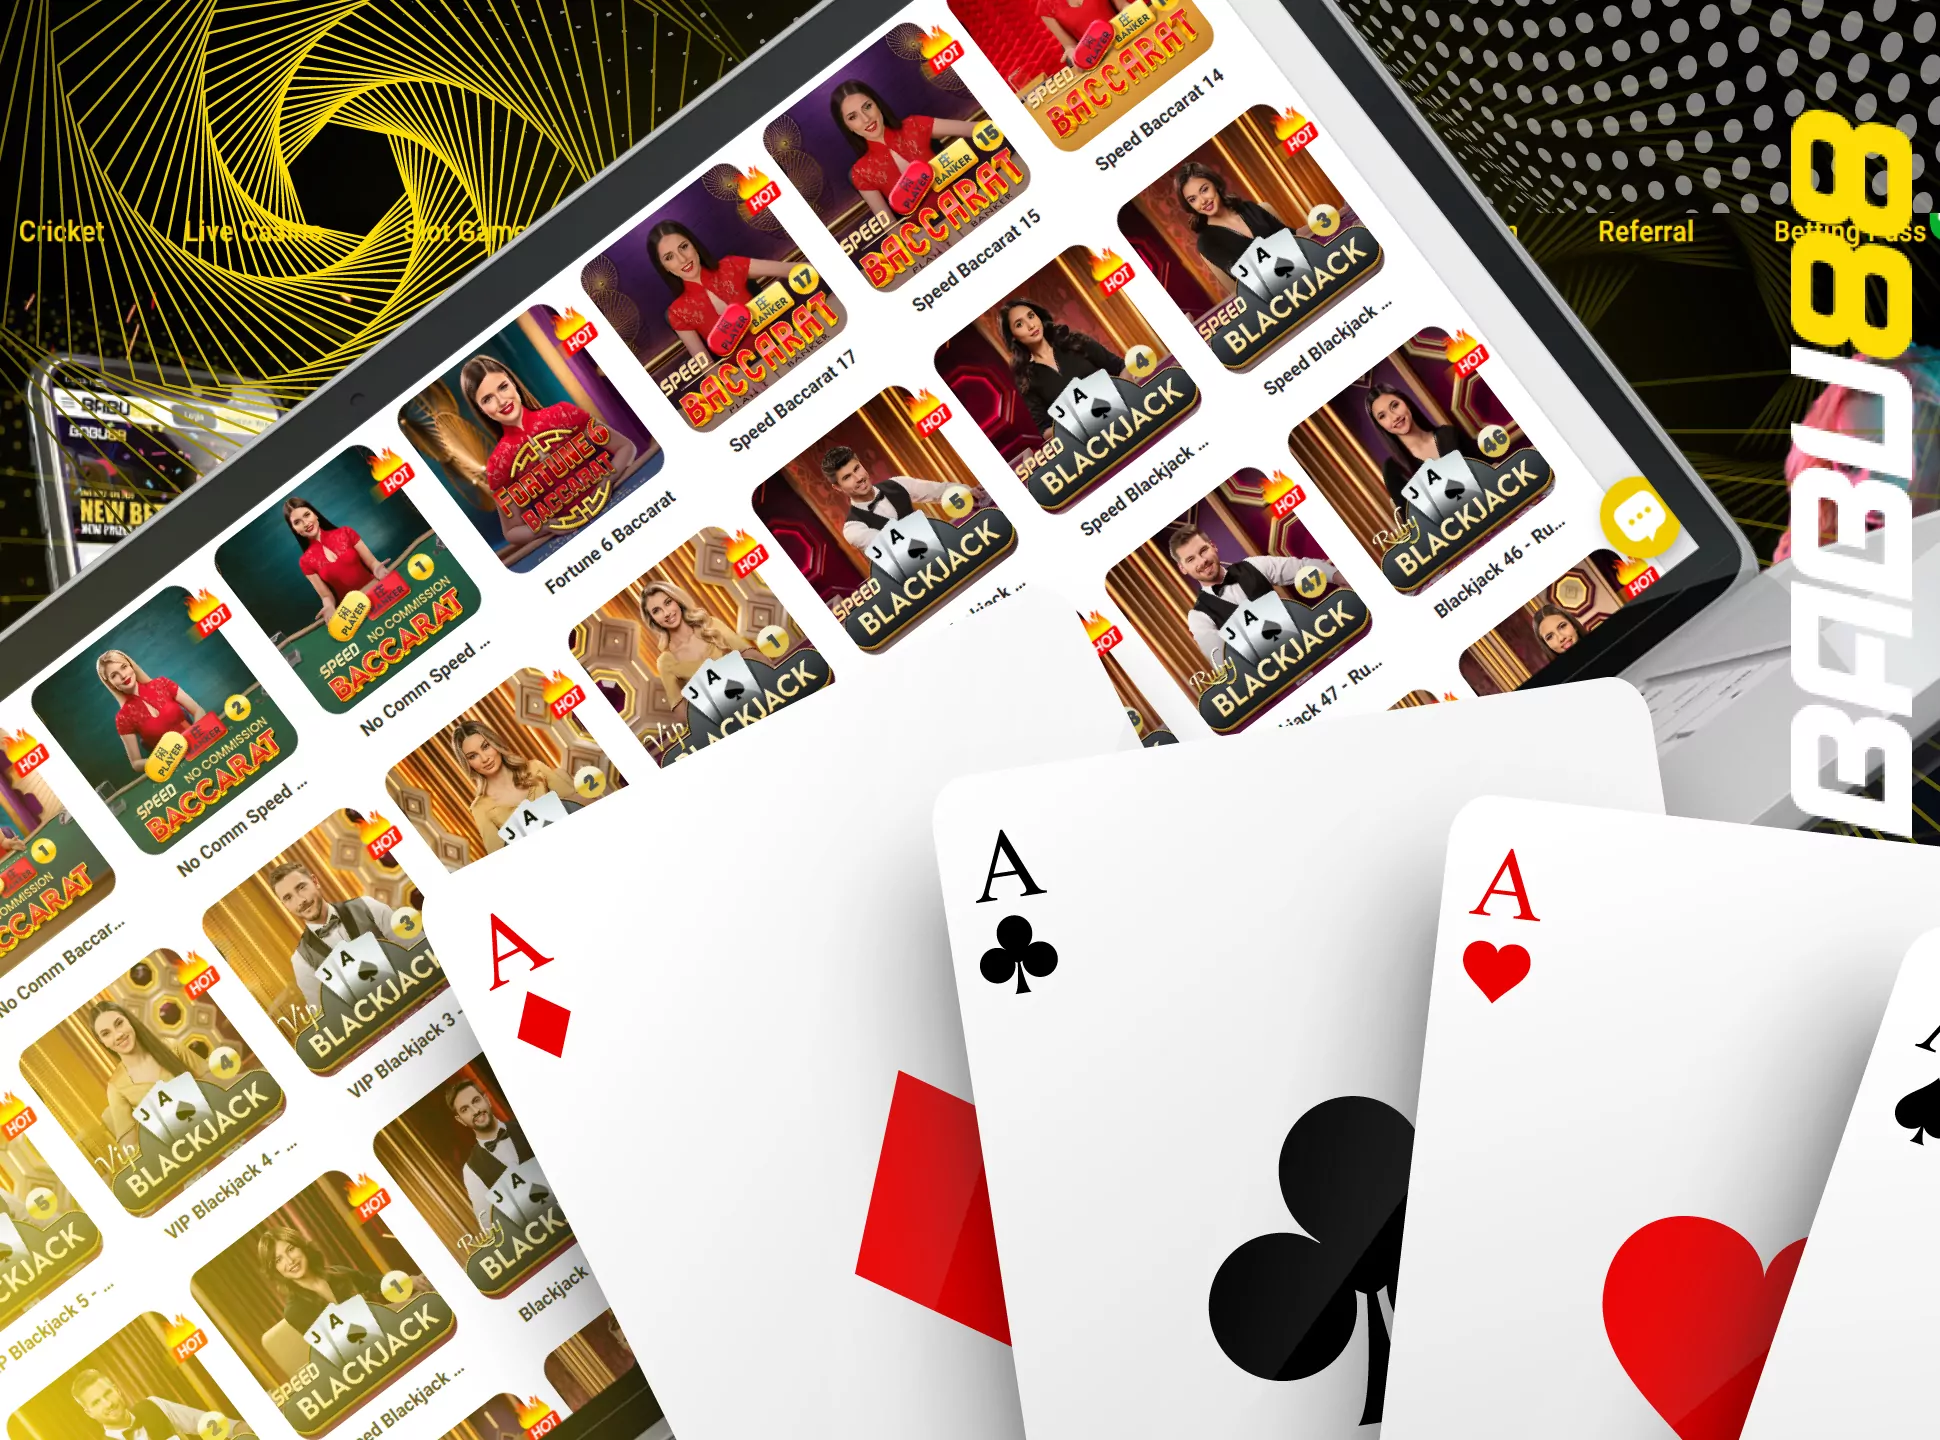 Babu88 has an online casino on it site and in the app.